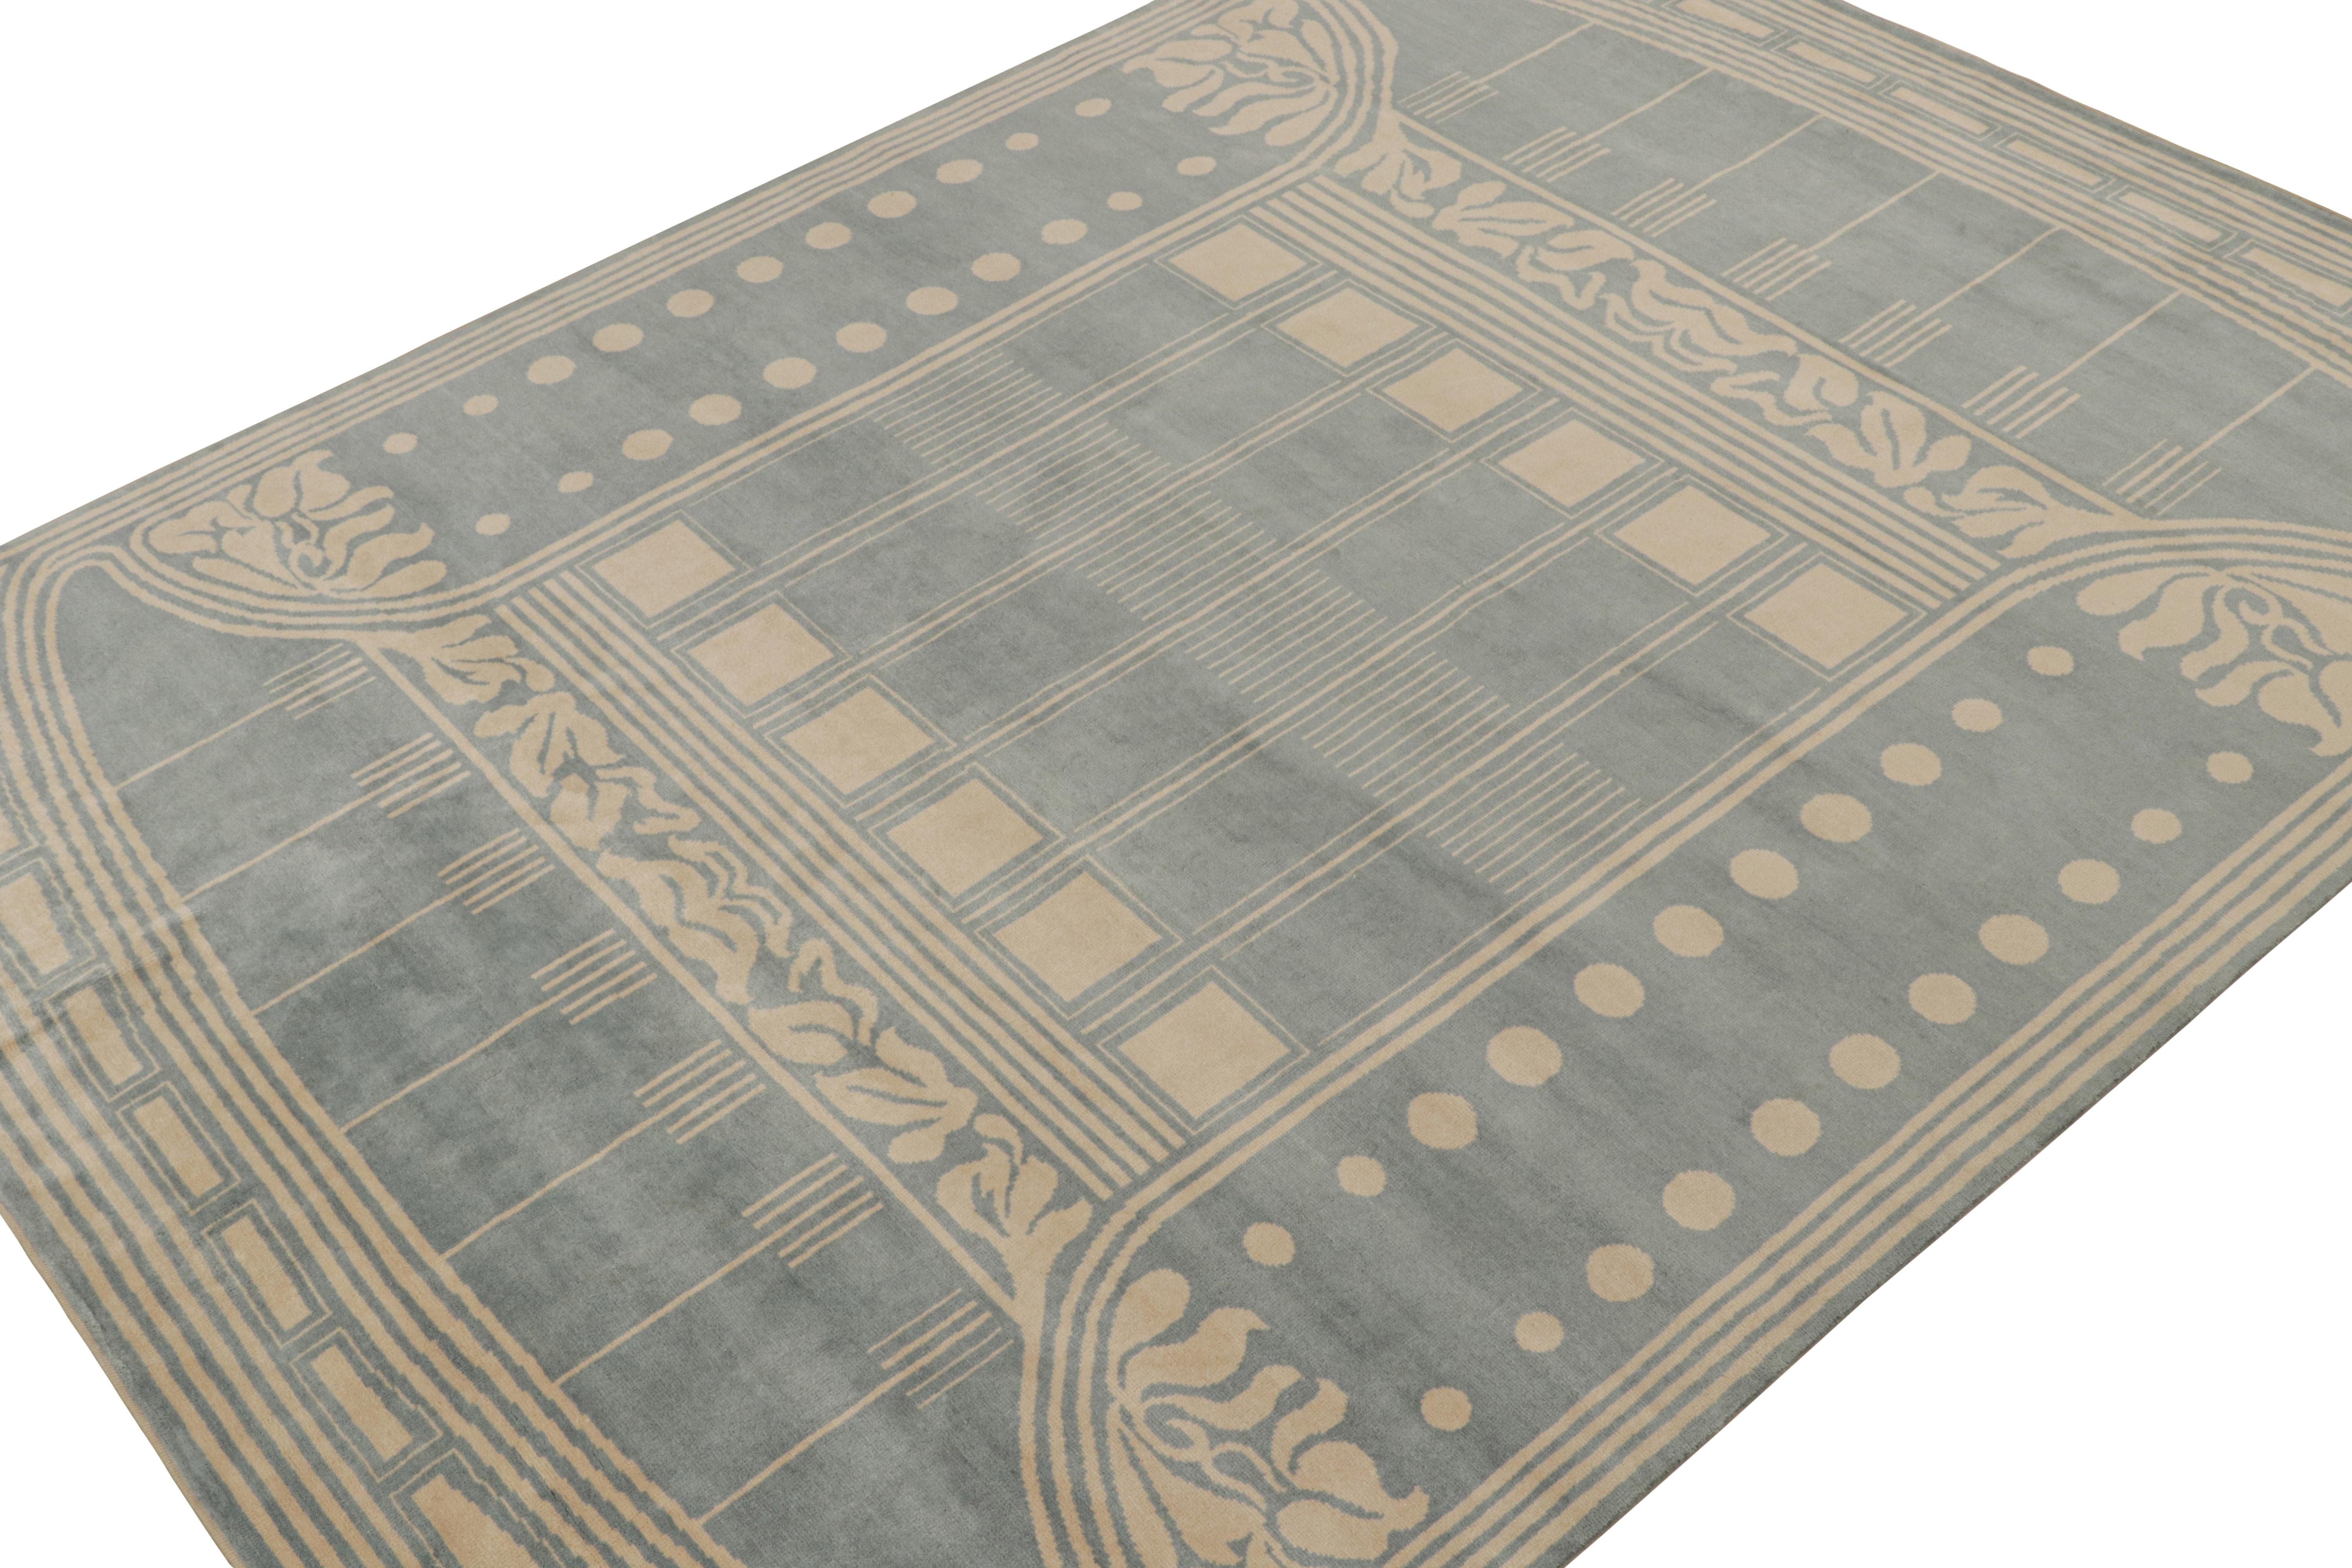 Hand knotted in wool, a 9x12 modern rug from Rug & Kilim’s Art Deco collection.

On the design

This French Art Deco style rug carries architectural inspiration among European styles of the 1920s. It carries defined geometric patterns in a blue &